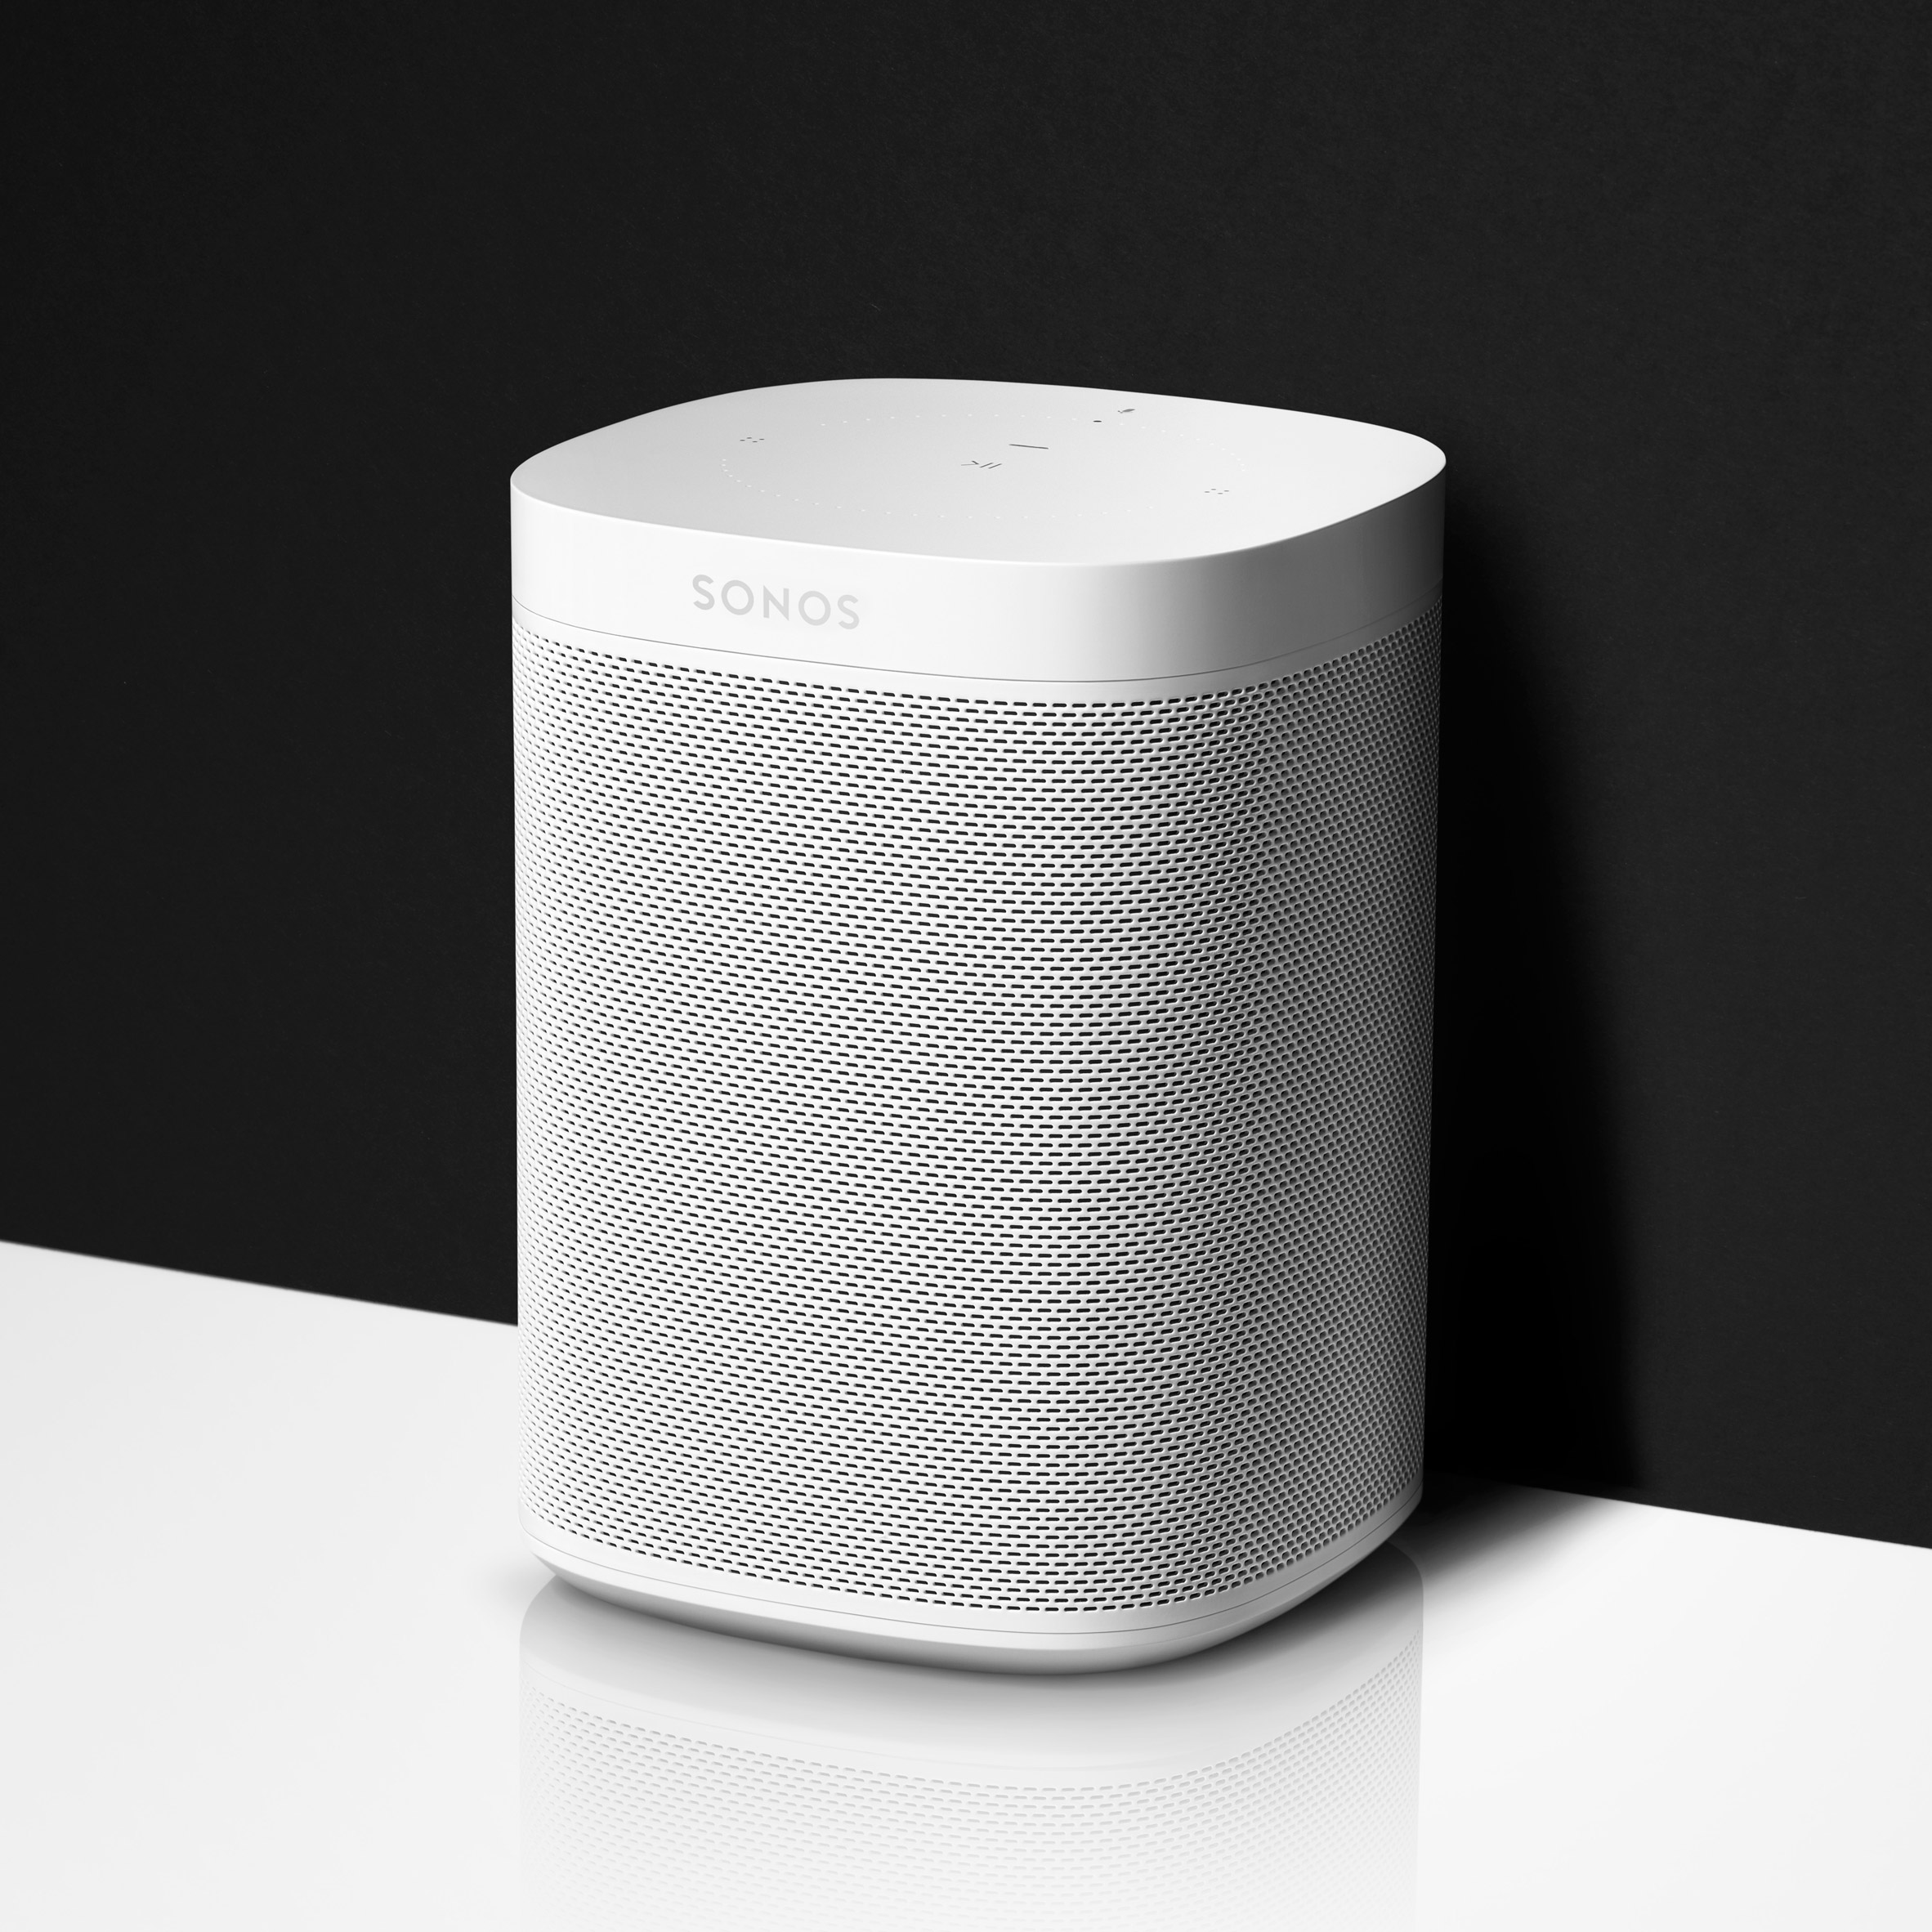 Udvinding pensum national flag Competition: win a Sonos One voice-controlled speaker